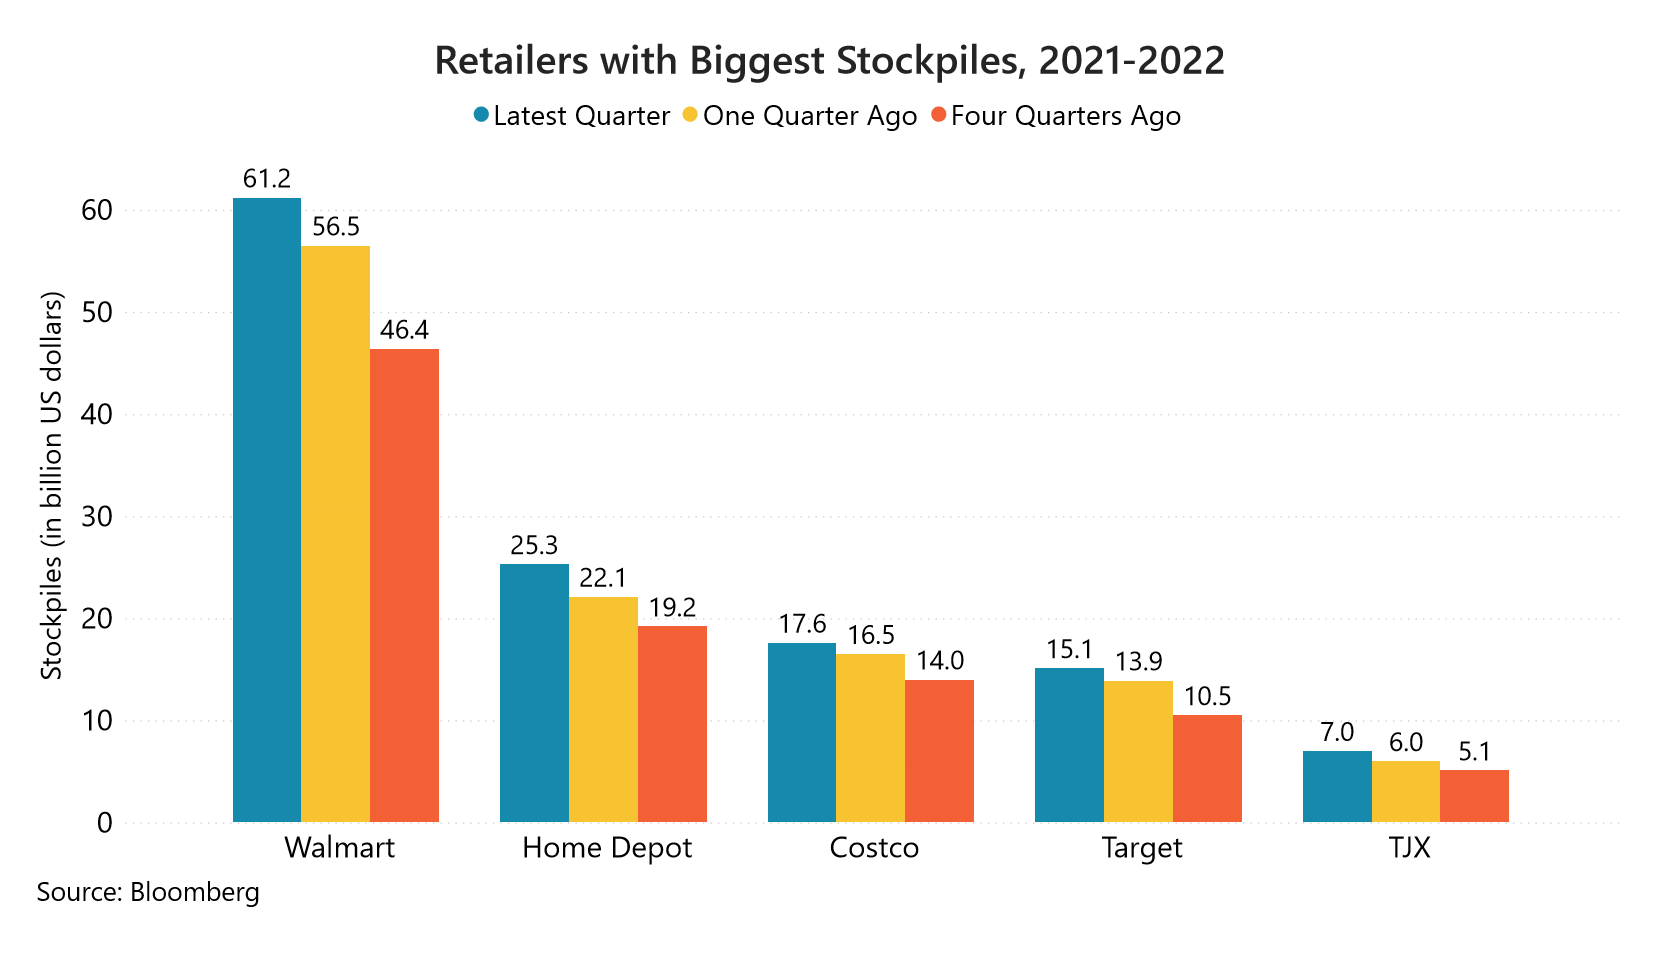 US retailers with the biggest stockpiles in 2022